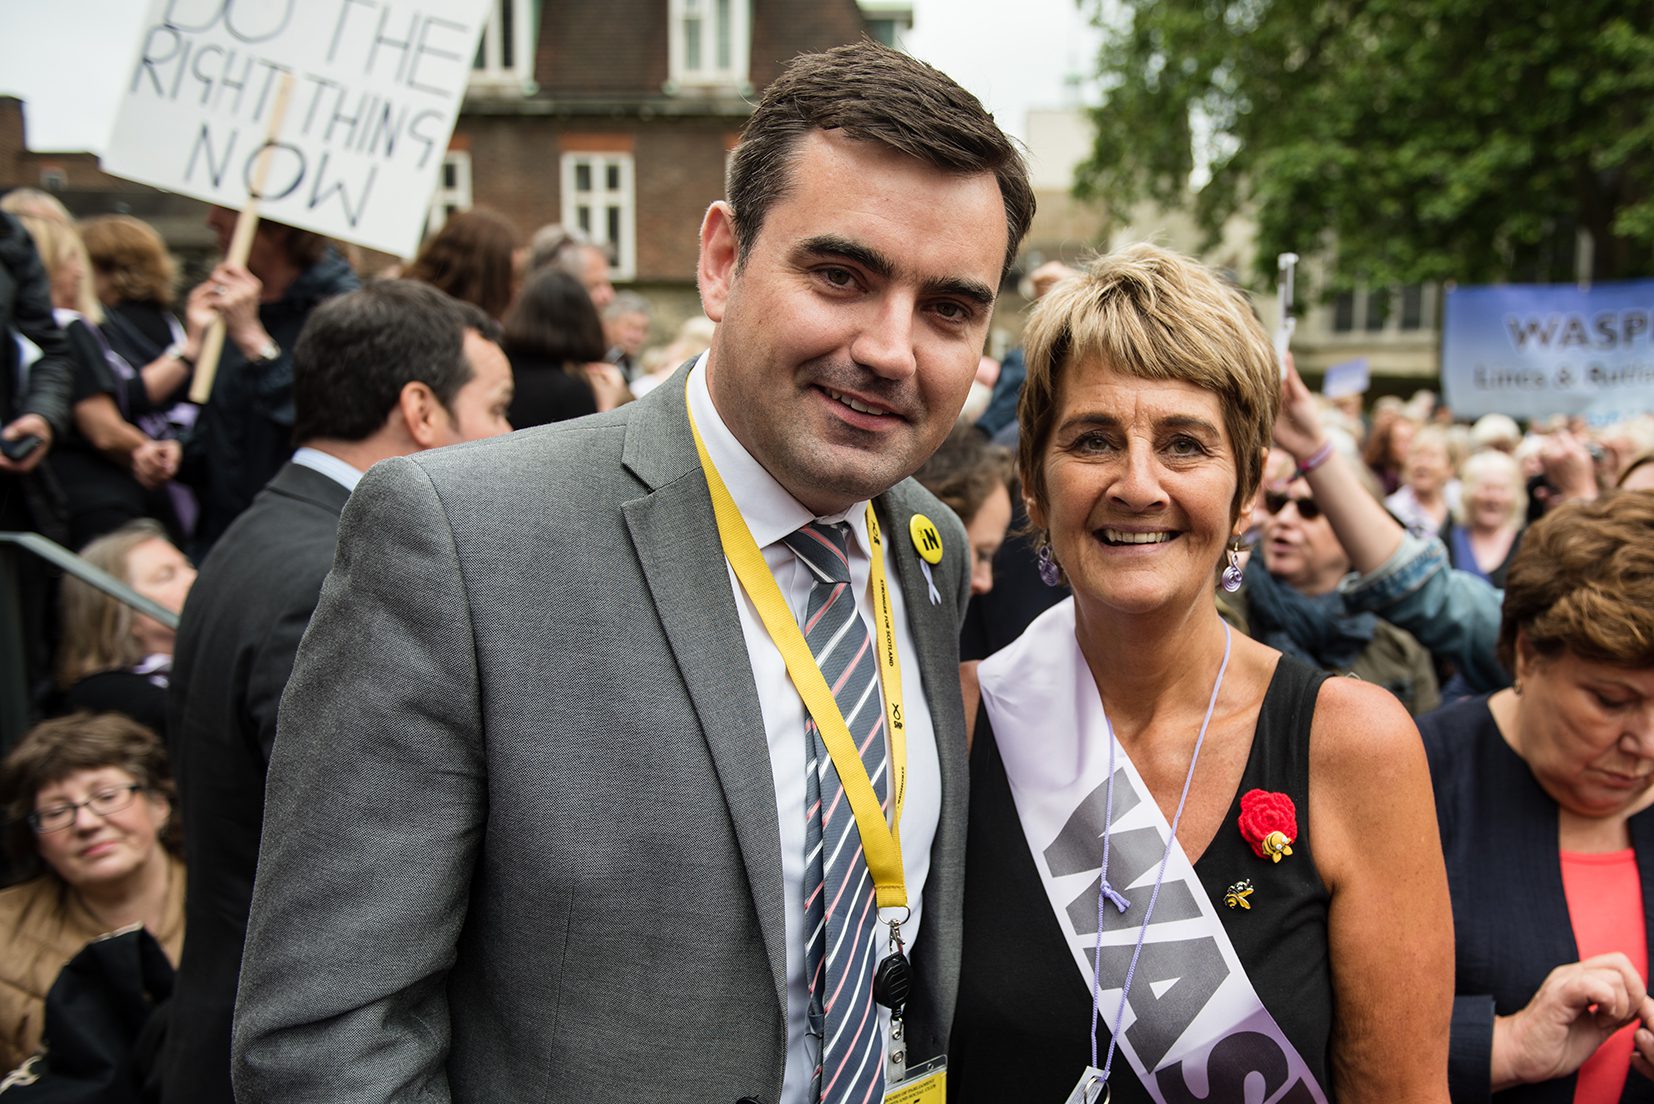 Gavin Newlands MP with a WASPI campaigner